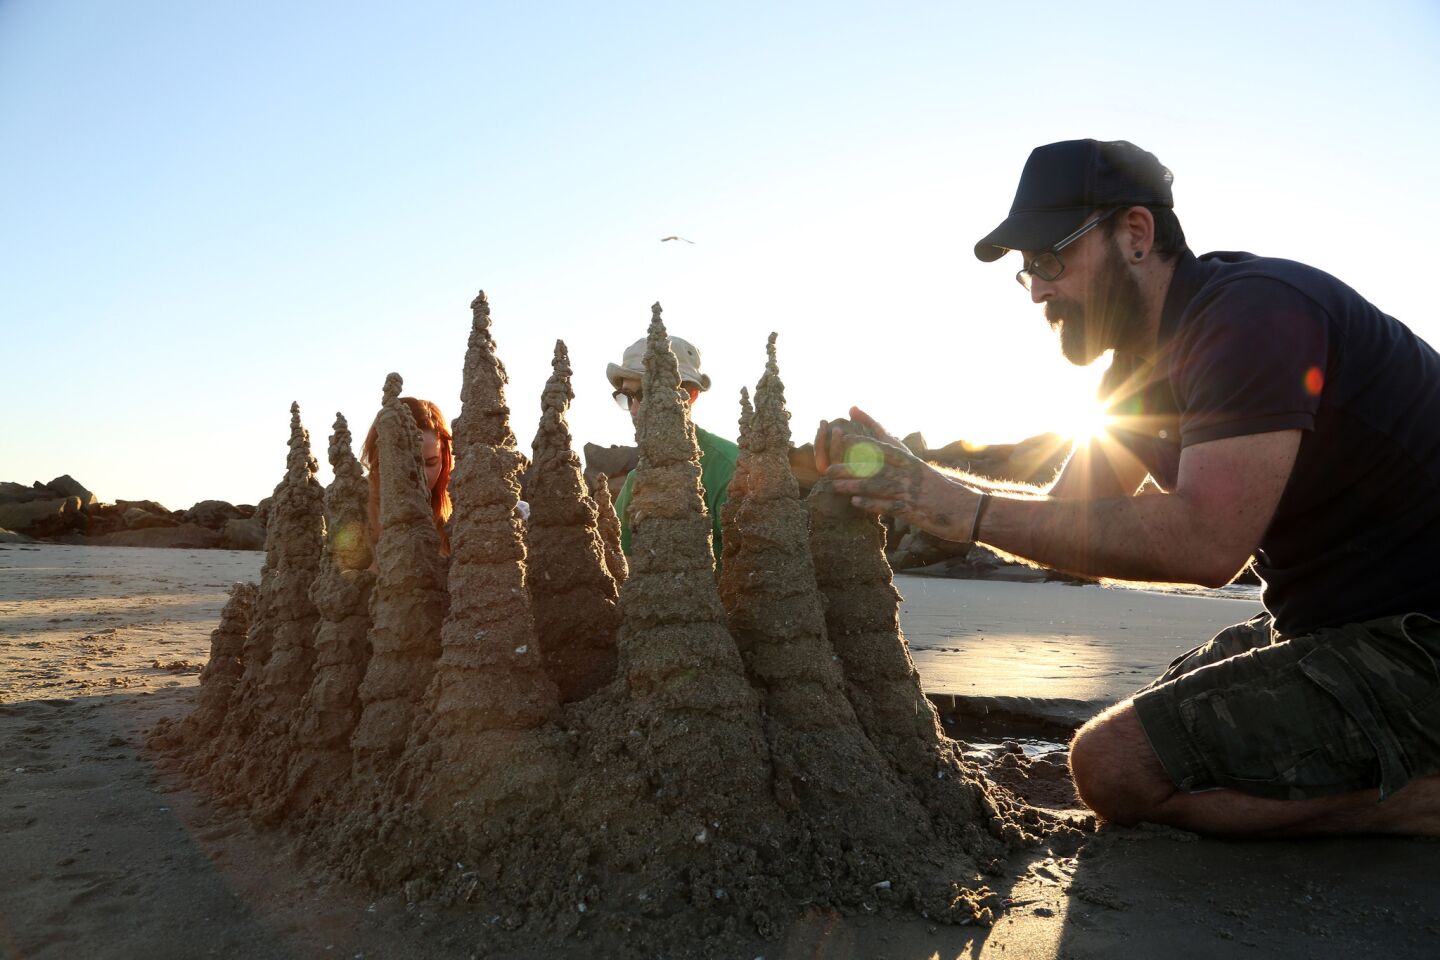 Basilios Papaioannou of West Hollywood builds a drip castle in the sand at Venice Beach.